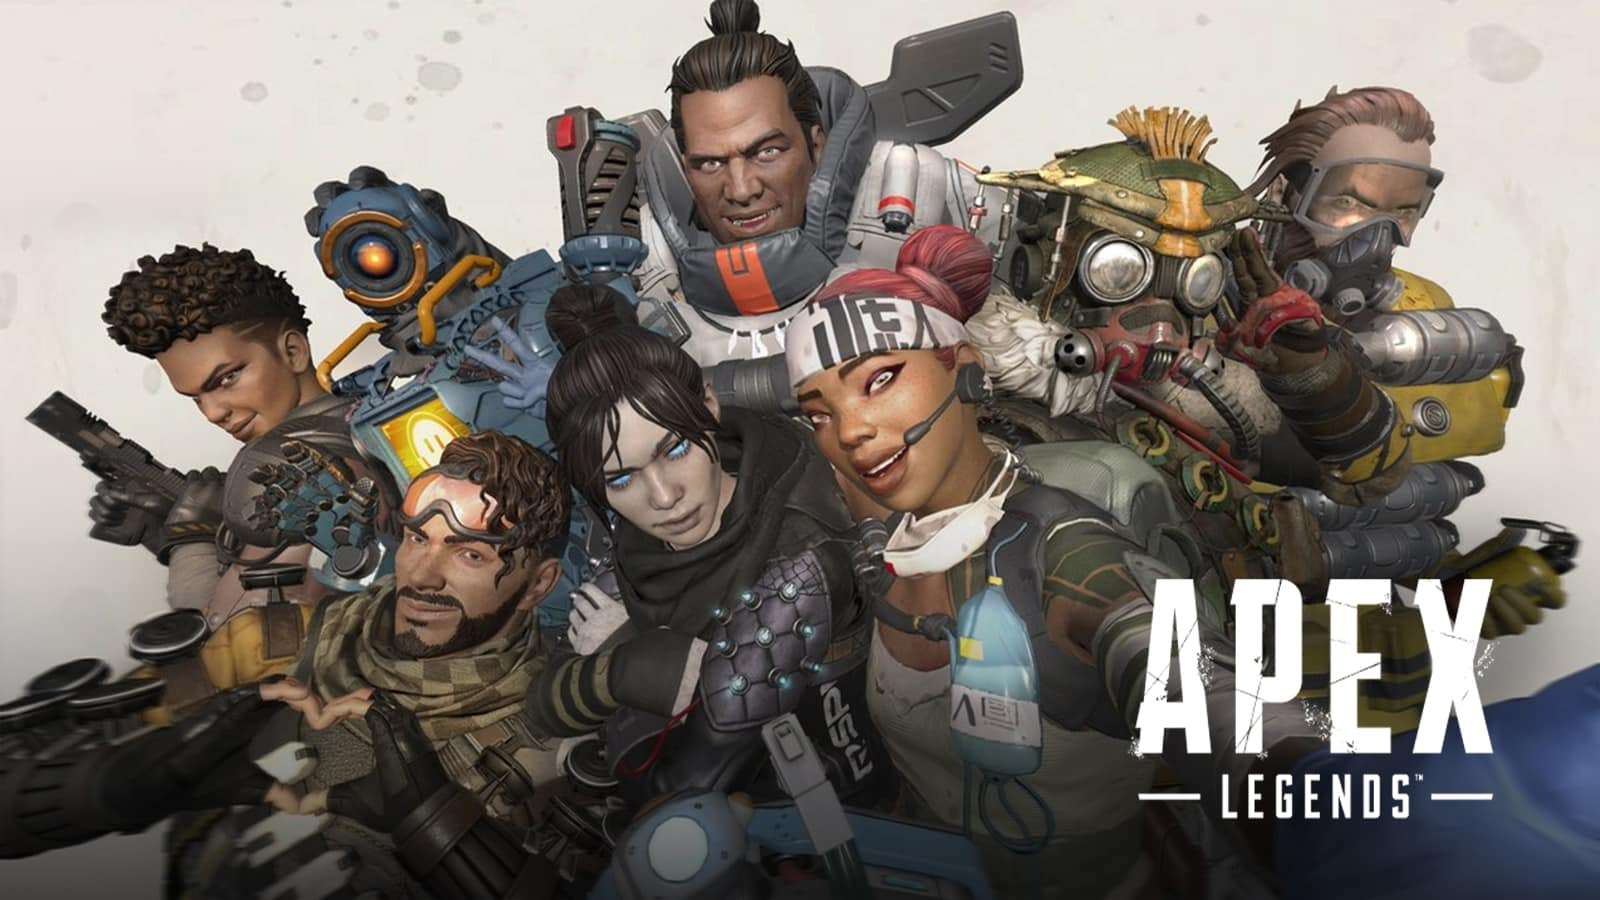 Apex Legends roster with Bangalore, Mirage, Pathfinder, Wraith, Gibraltar, Lifeline, Pathfinder, and Caustic